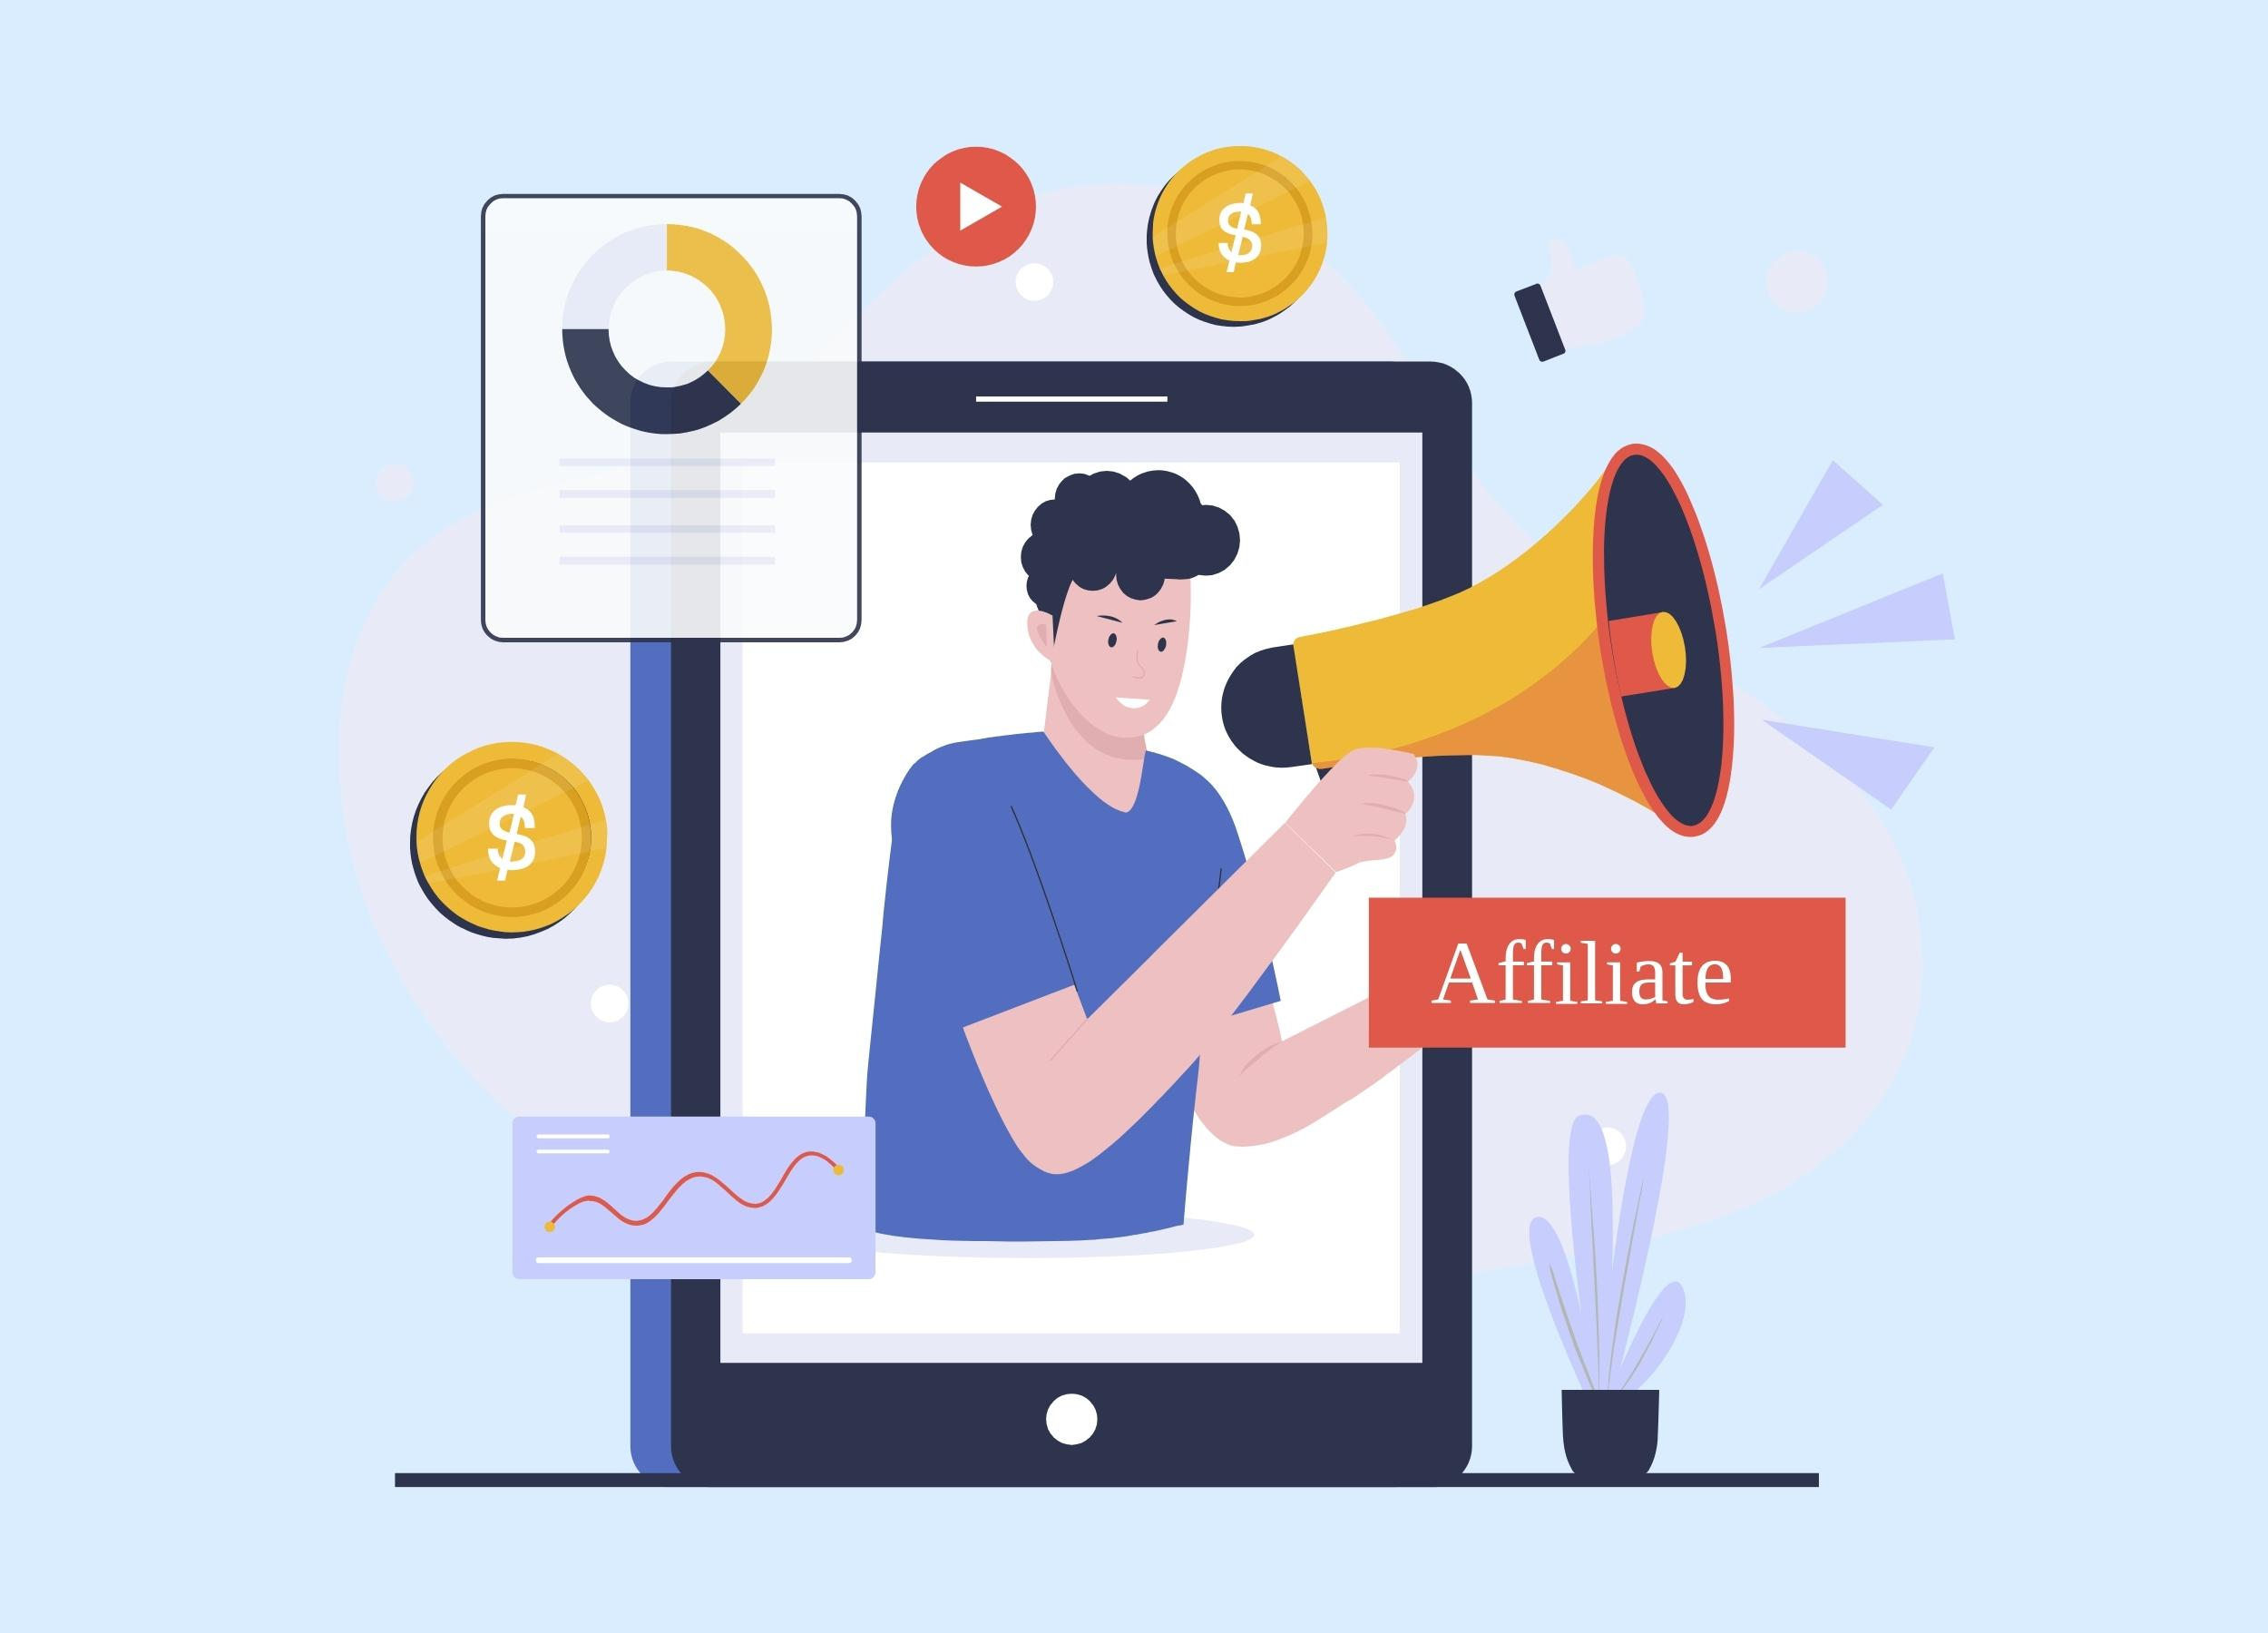 Affiliate marketing concept with a network of interconnected icons representing affiliate program